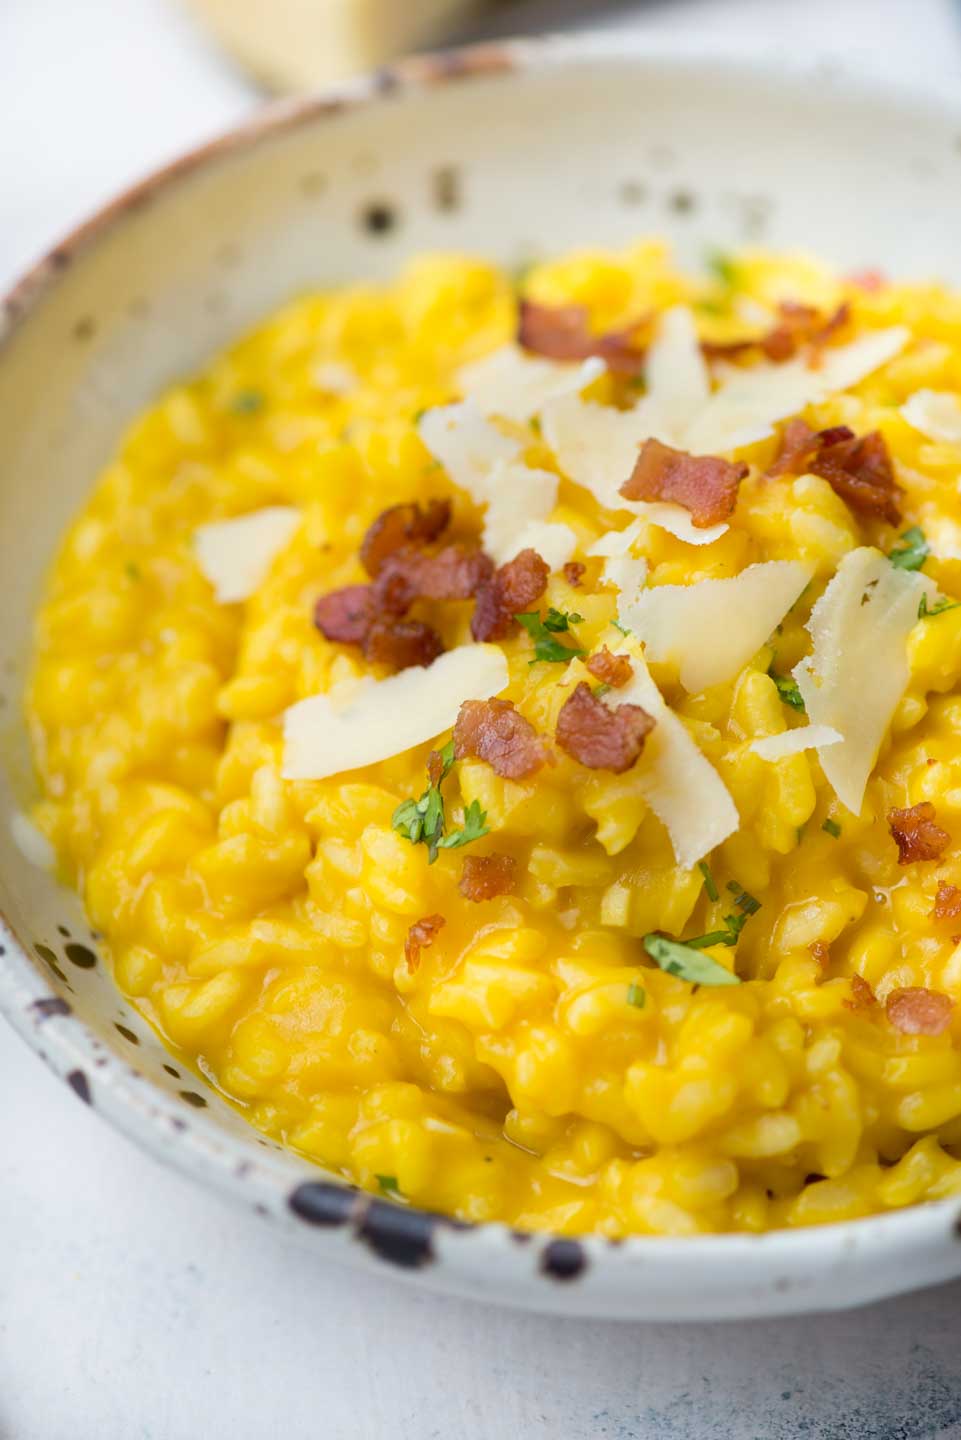 Creamy Butternut Squash Risotto, a classic Italian rice dish with arborio rice, Butternut squash puree, nutmeg, white wine and Parmesan cheese. Making restaurant-quality risotto rice at home is easy and takes only 30 minutes.